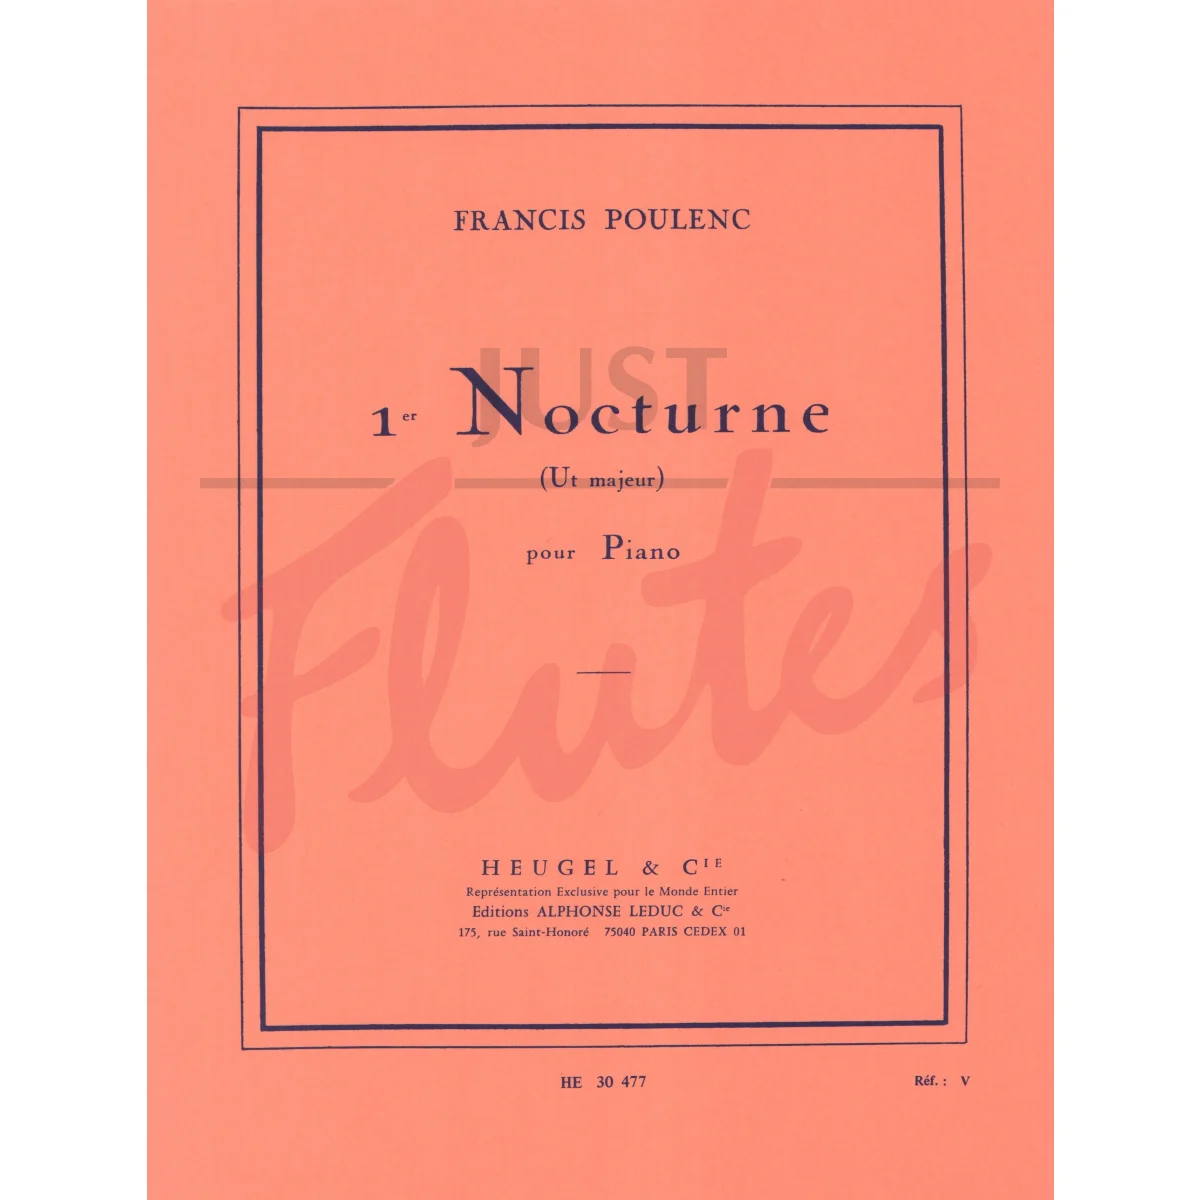 Nocturne No 1 in C major for Piano